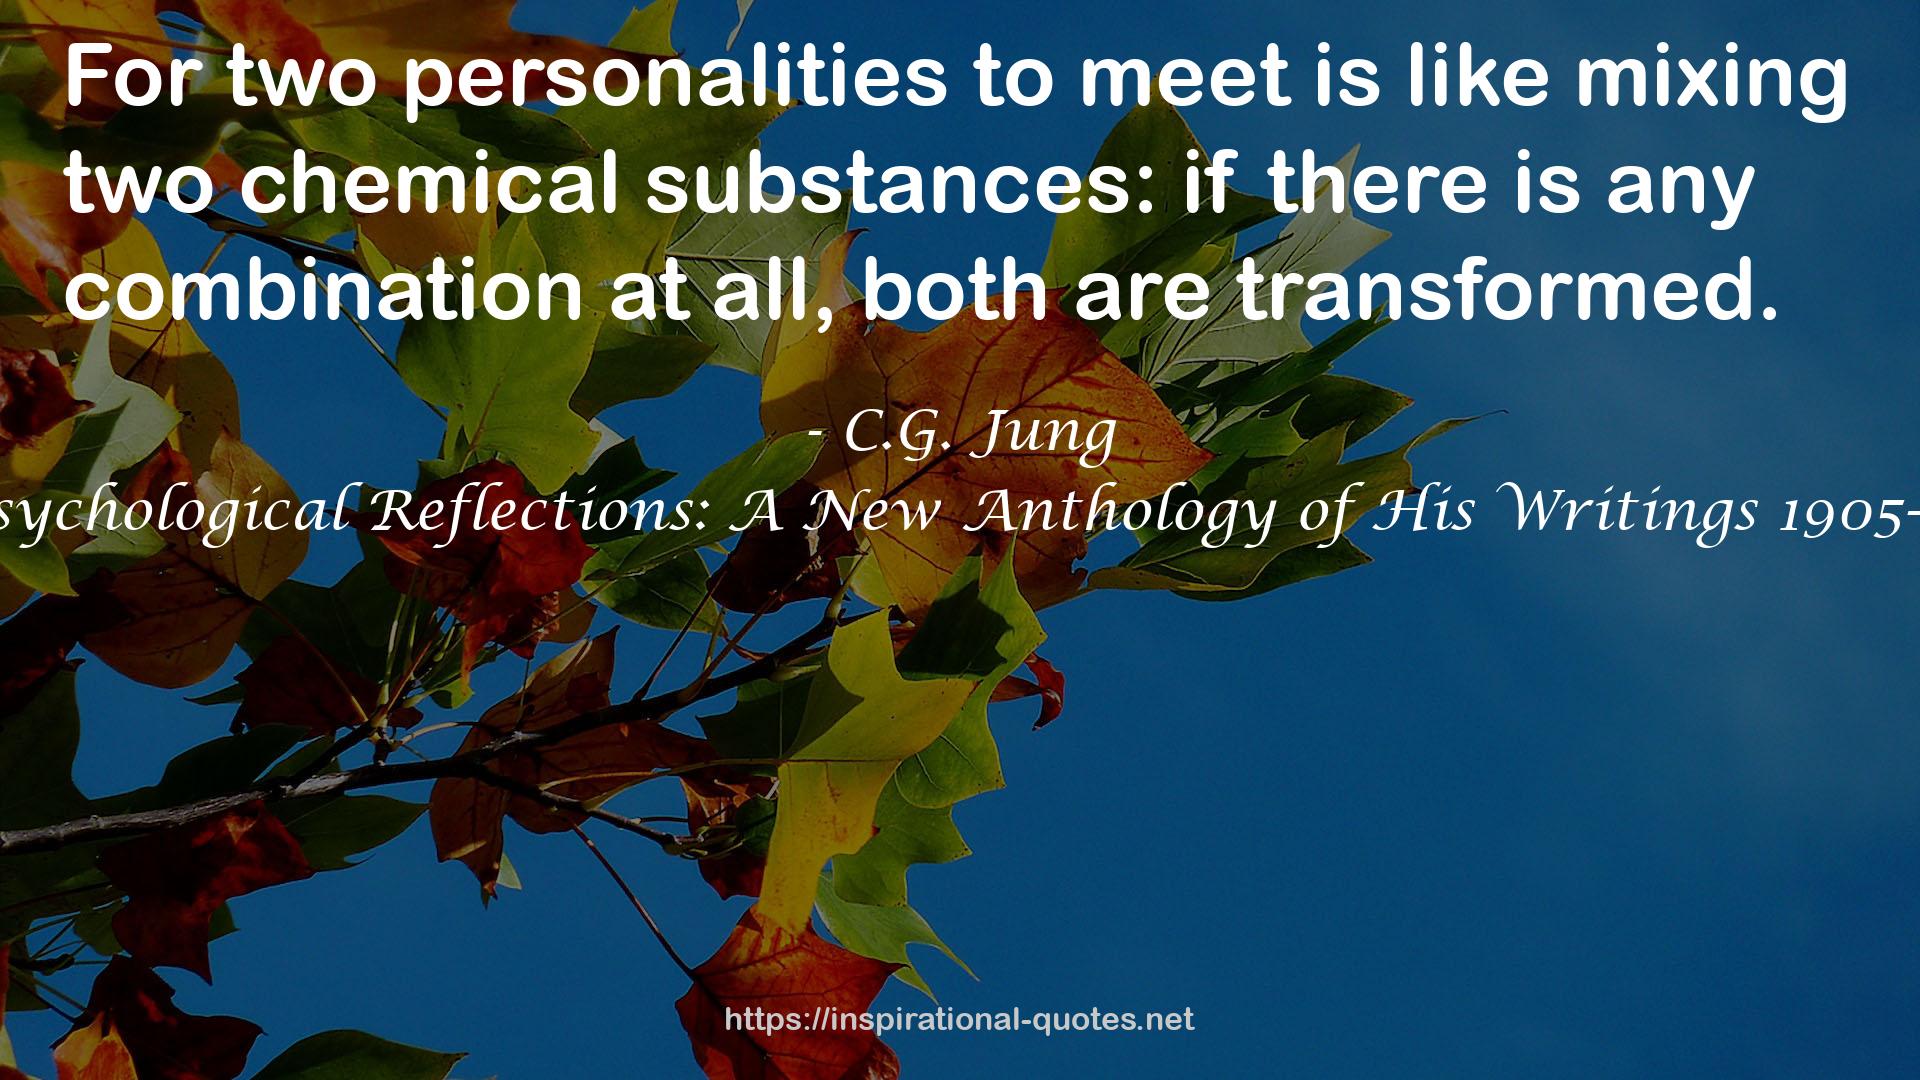 Psychological Reflections: A New Anthology of His Writings 1905-61 QUOTES